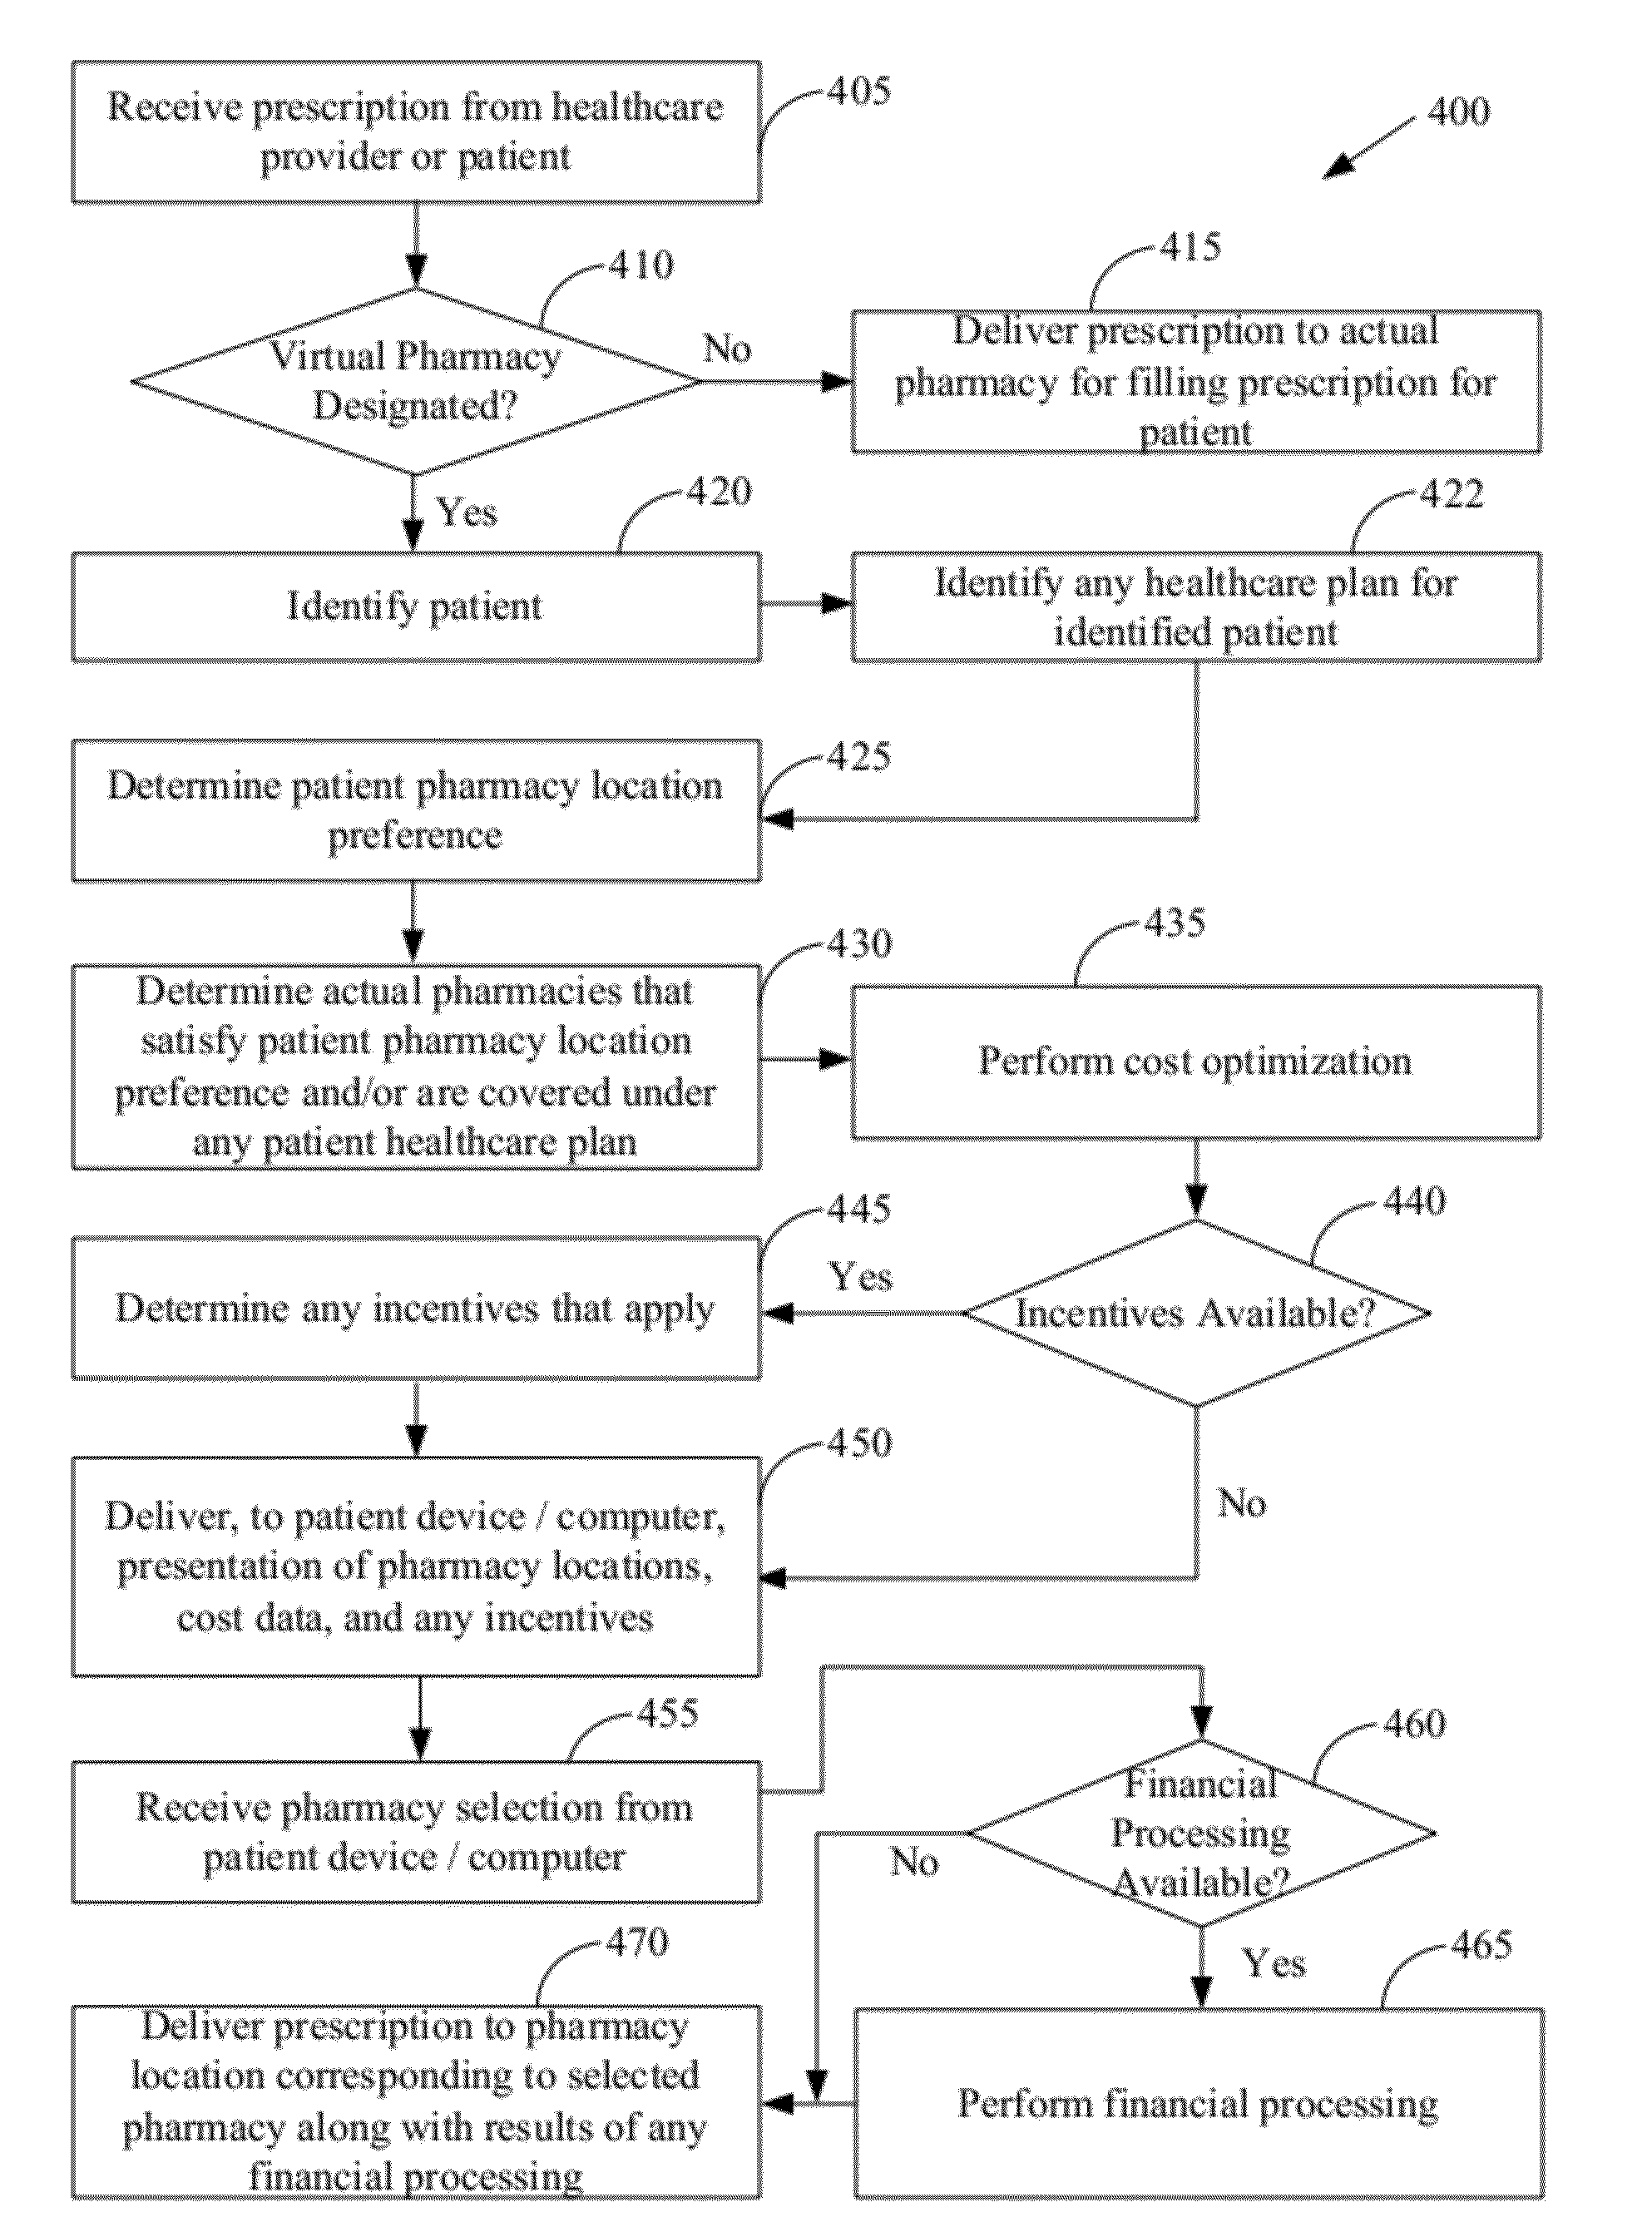 Systems and methods for financial processing for a virtual pharmacy